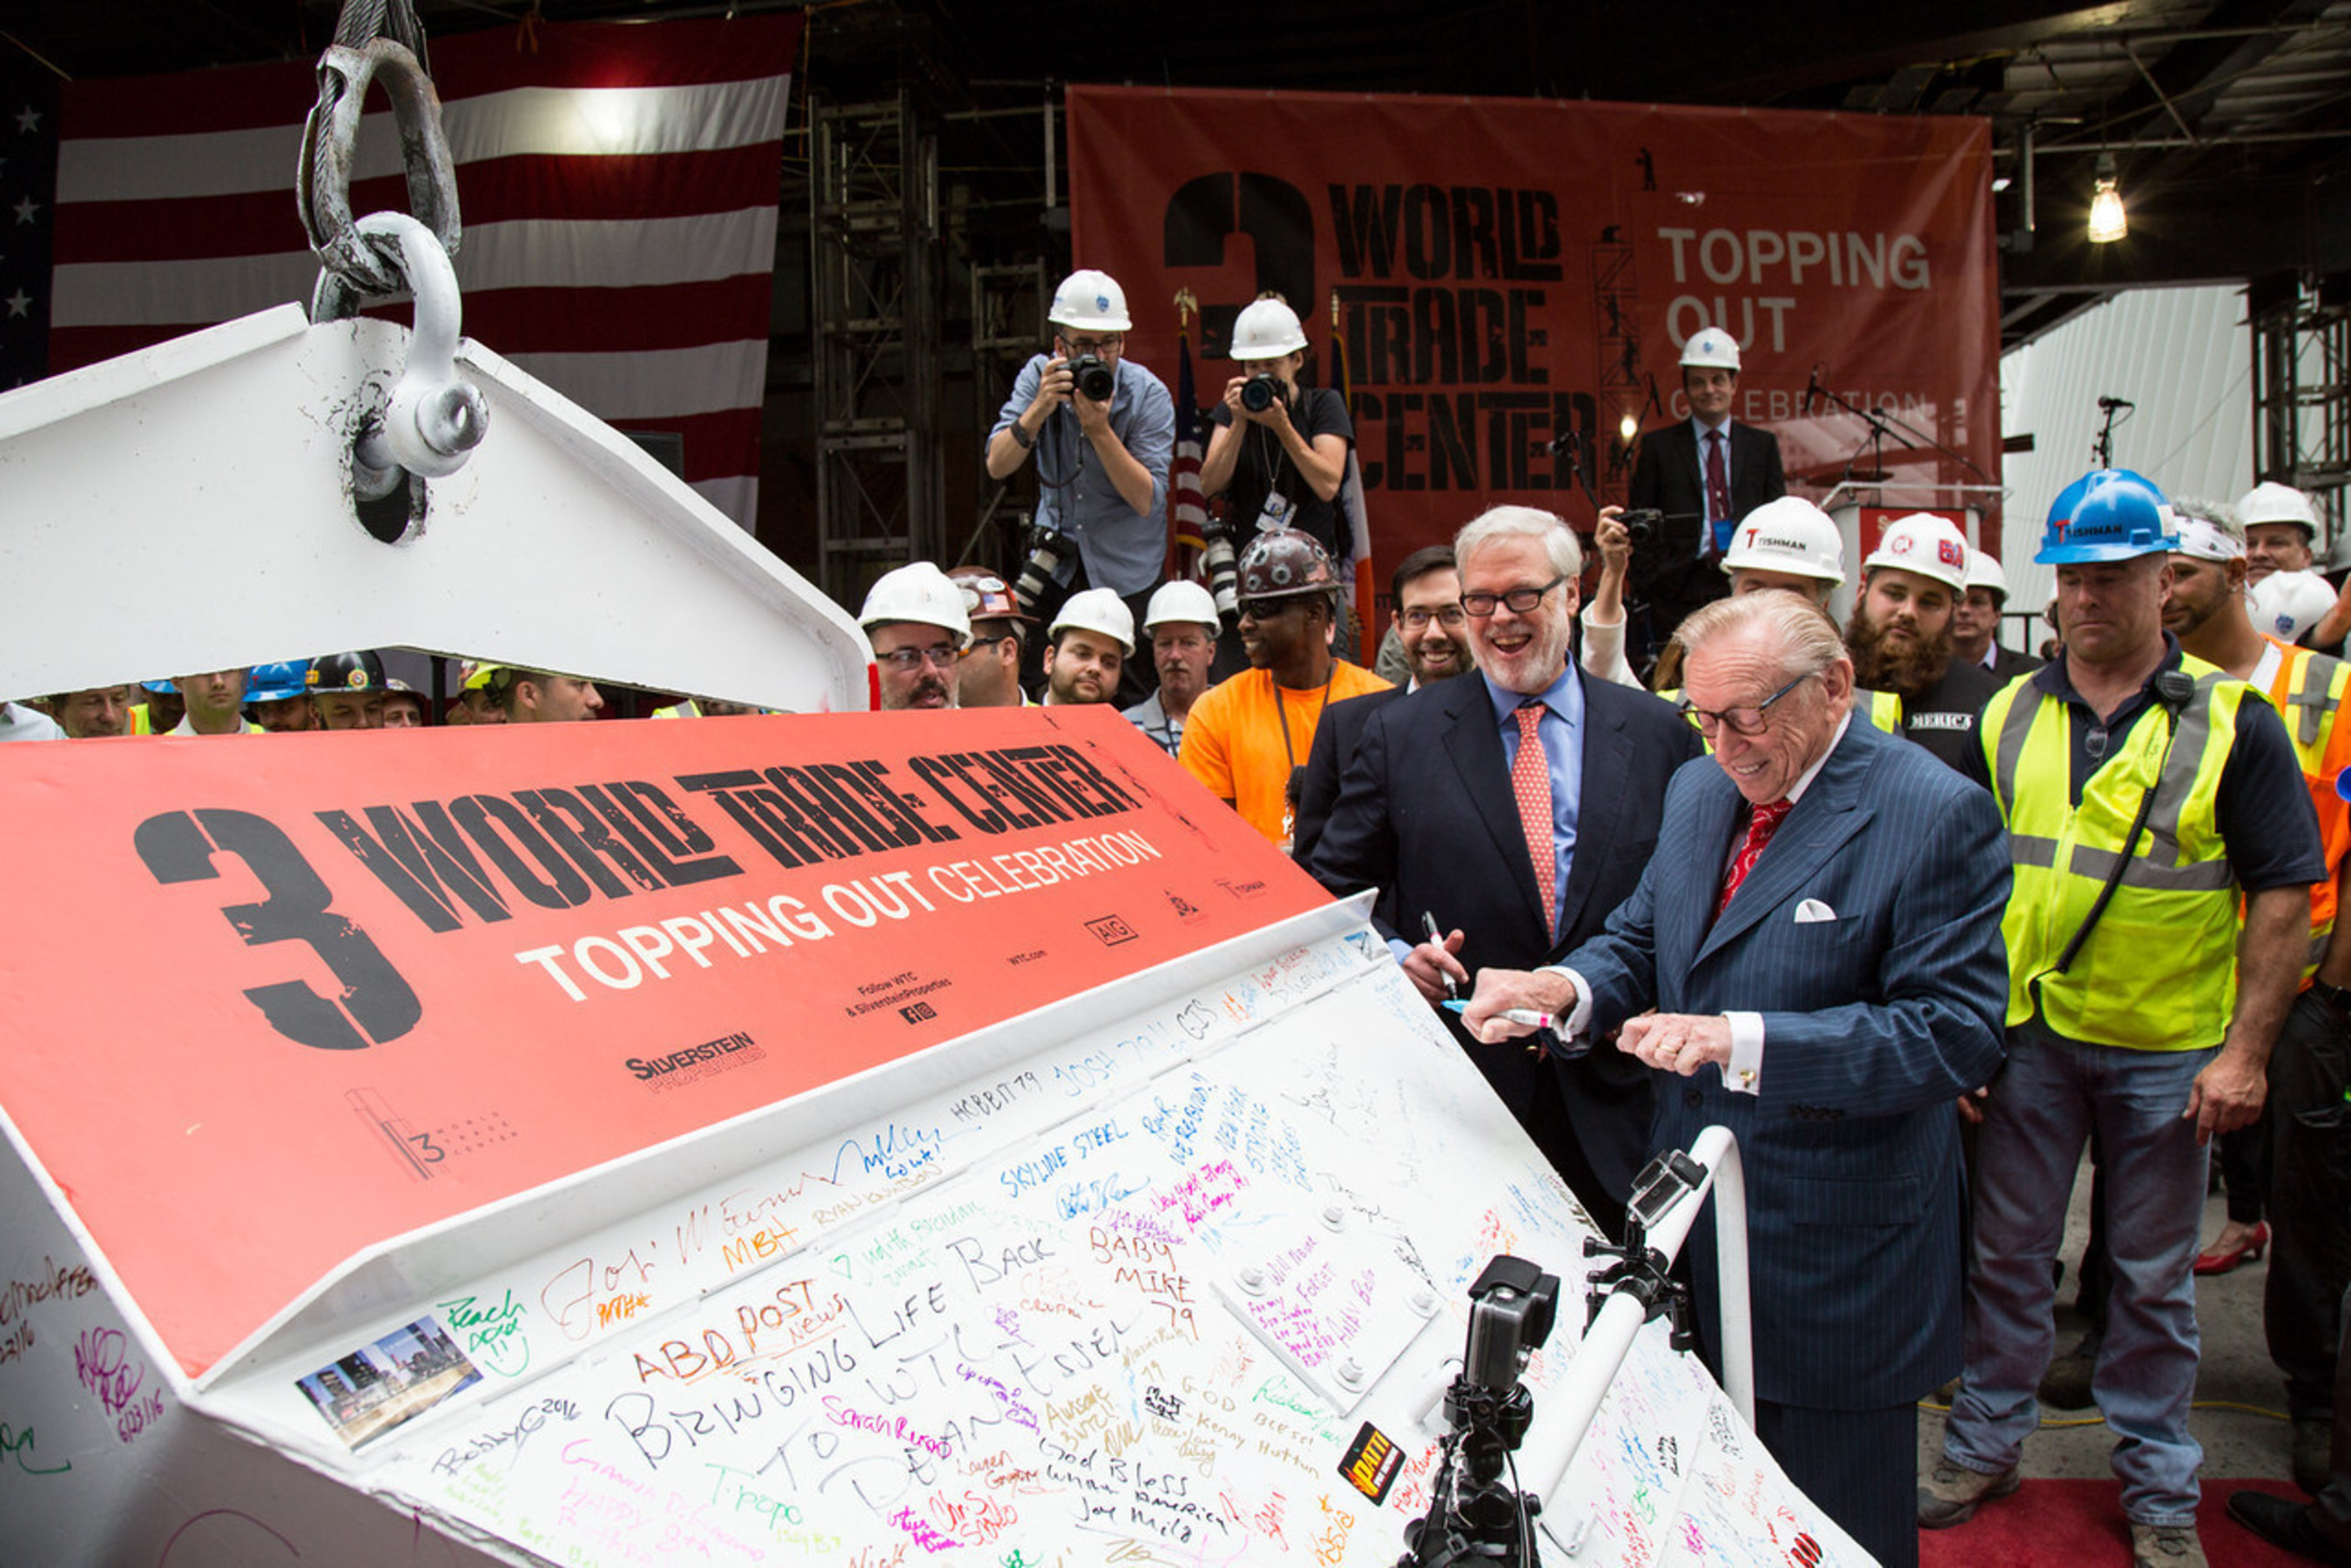 Silverstein Properties Chairman Larry A. Silverstein (right) and Port Authority of New York & New Jersey Executive Director Pat Foye at topping out ceremony for 3 World Trade Center